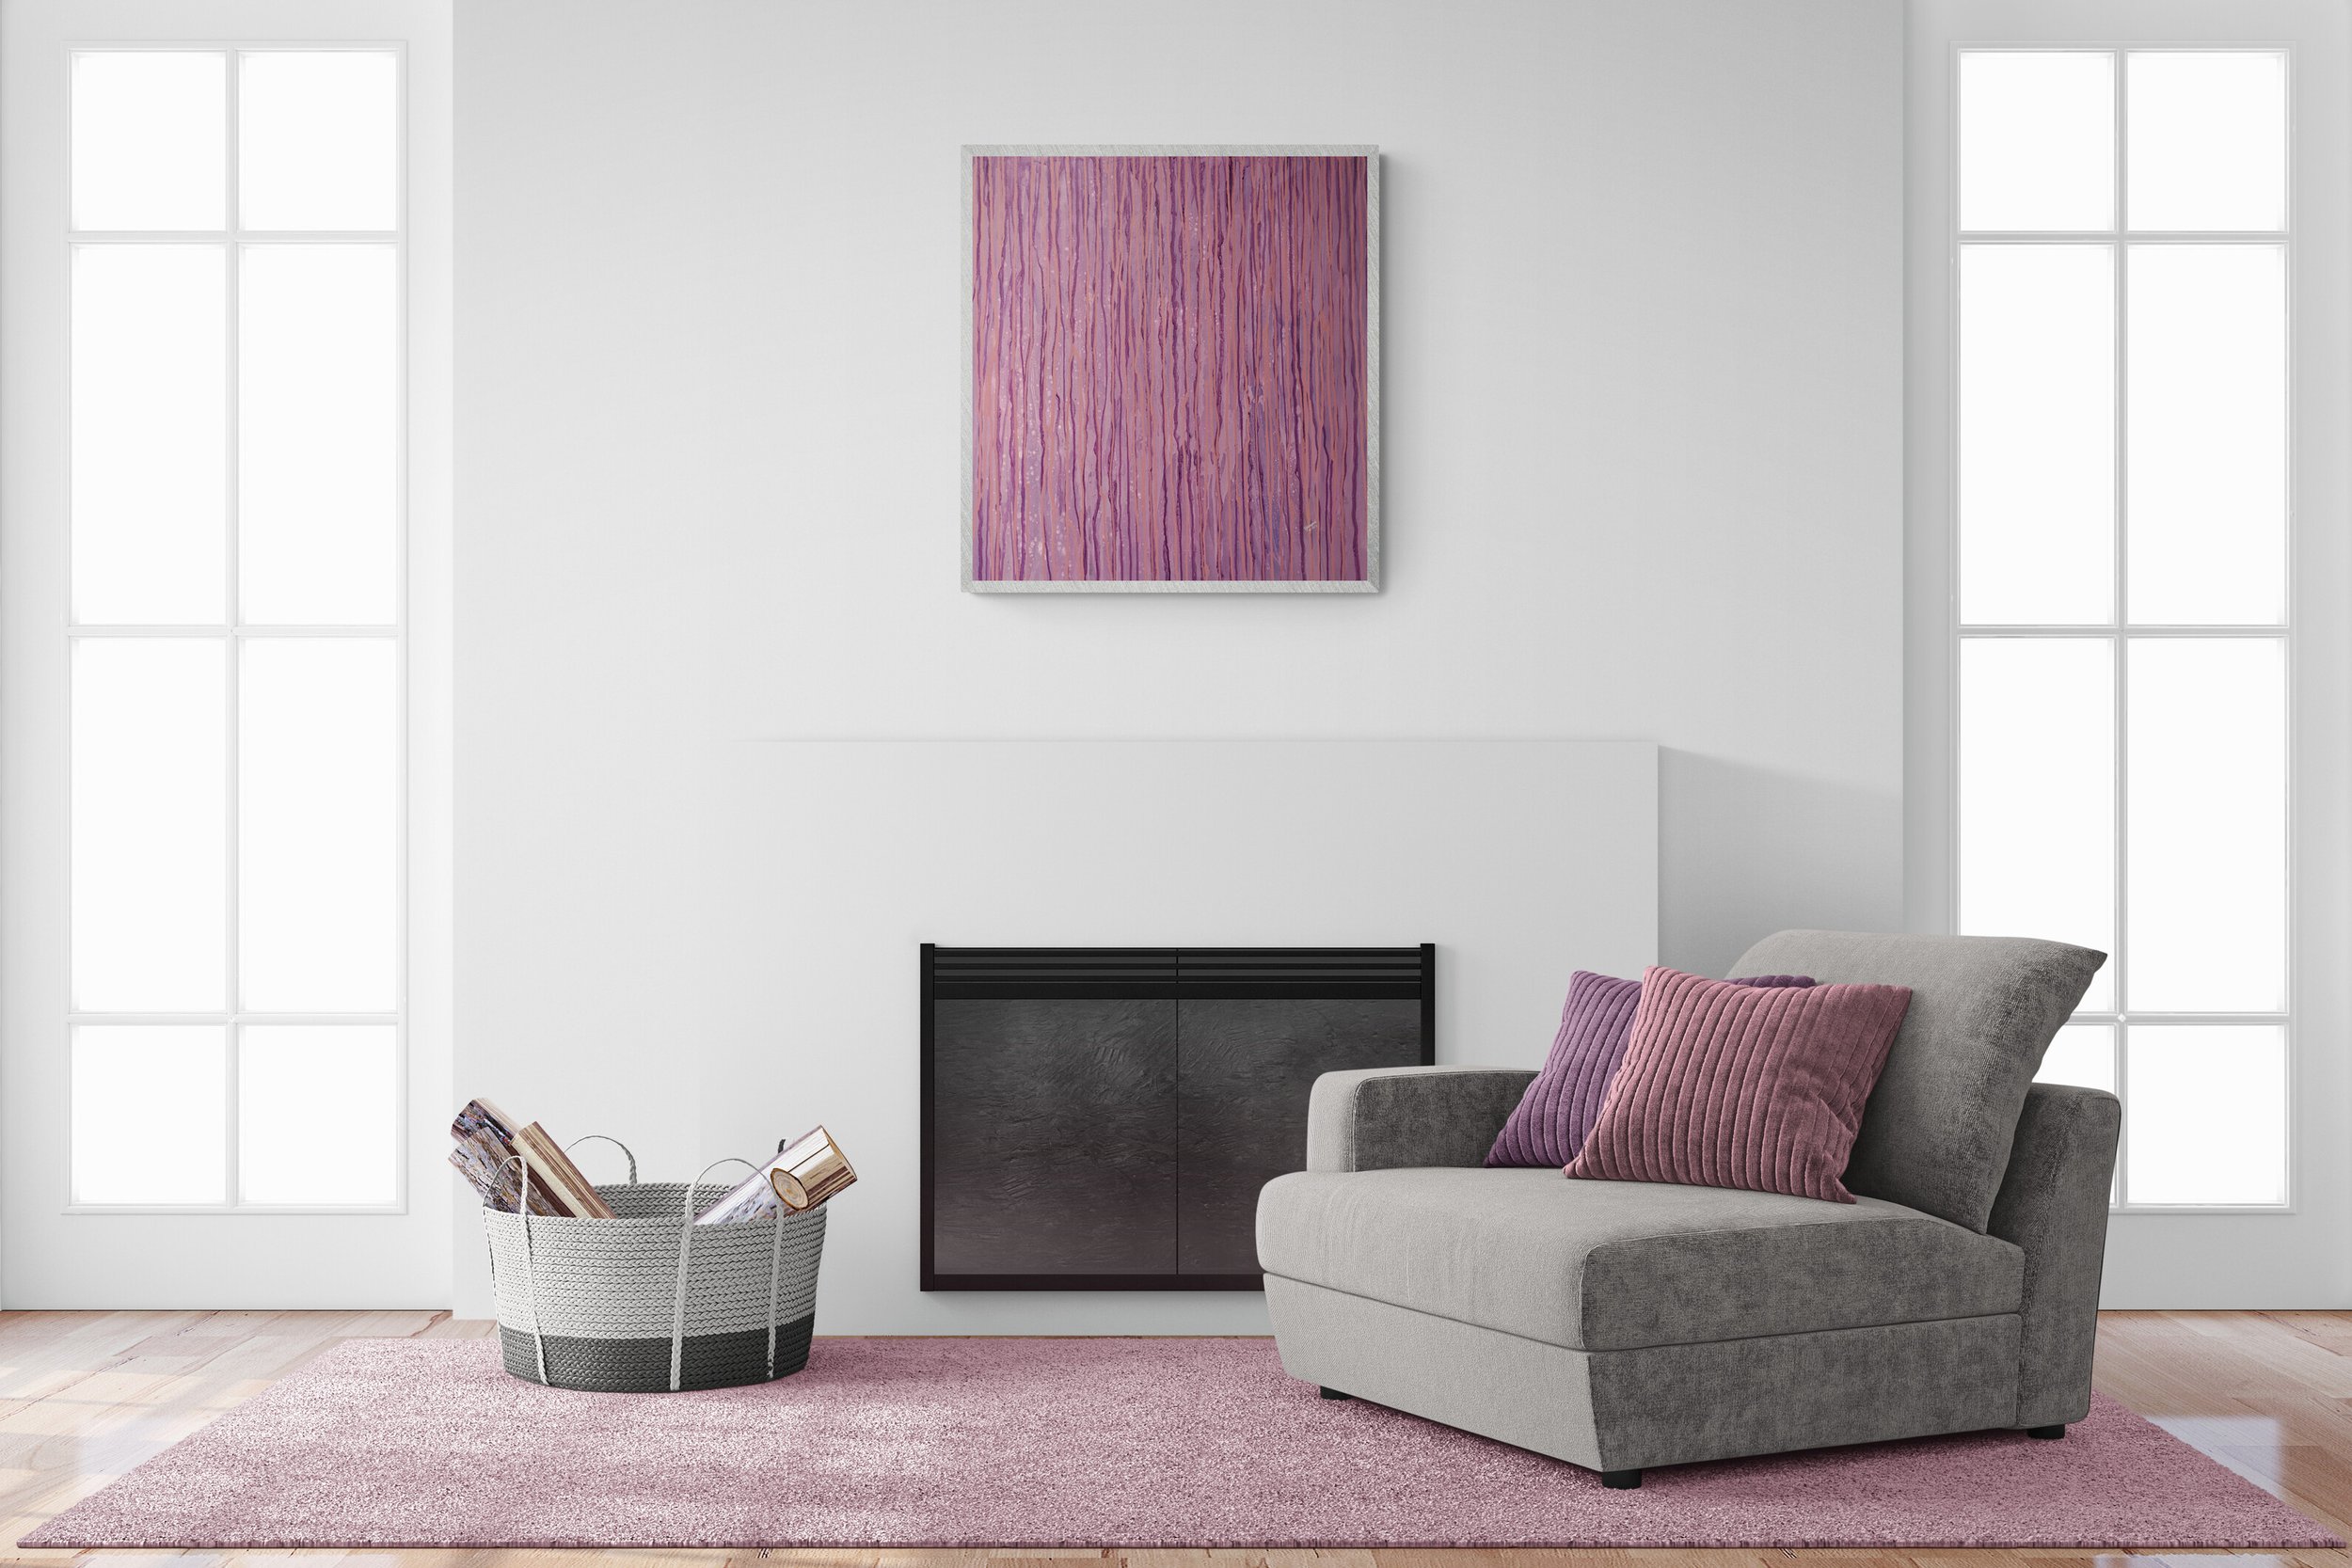 Modern_living_room_interior_with_fireplace (1).jpg